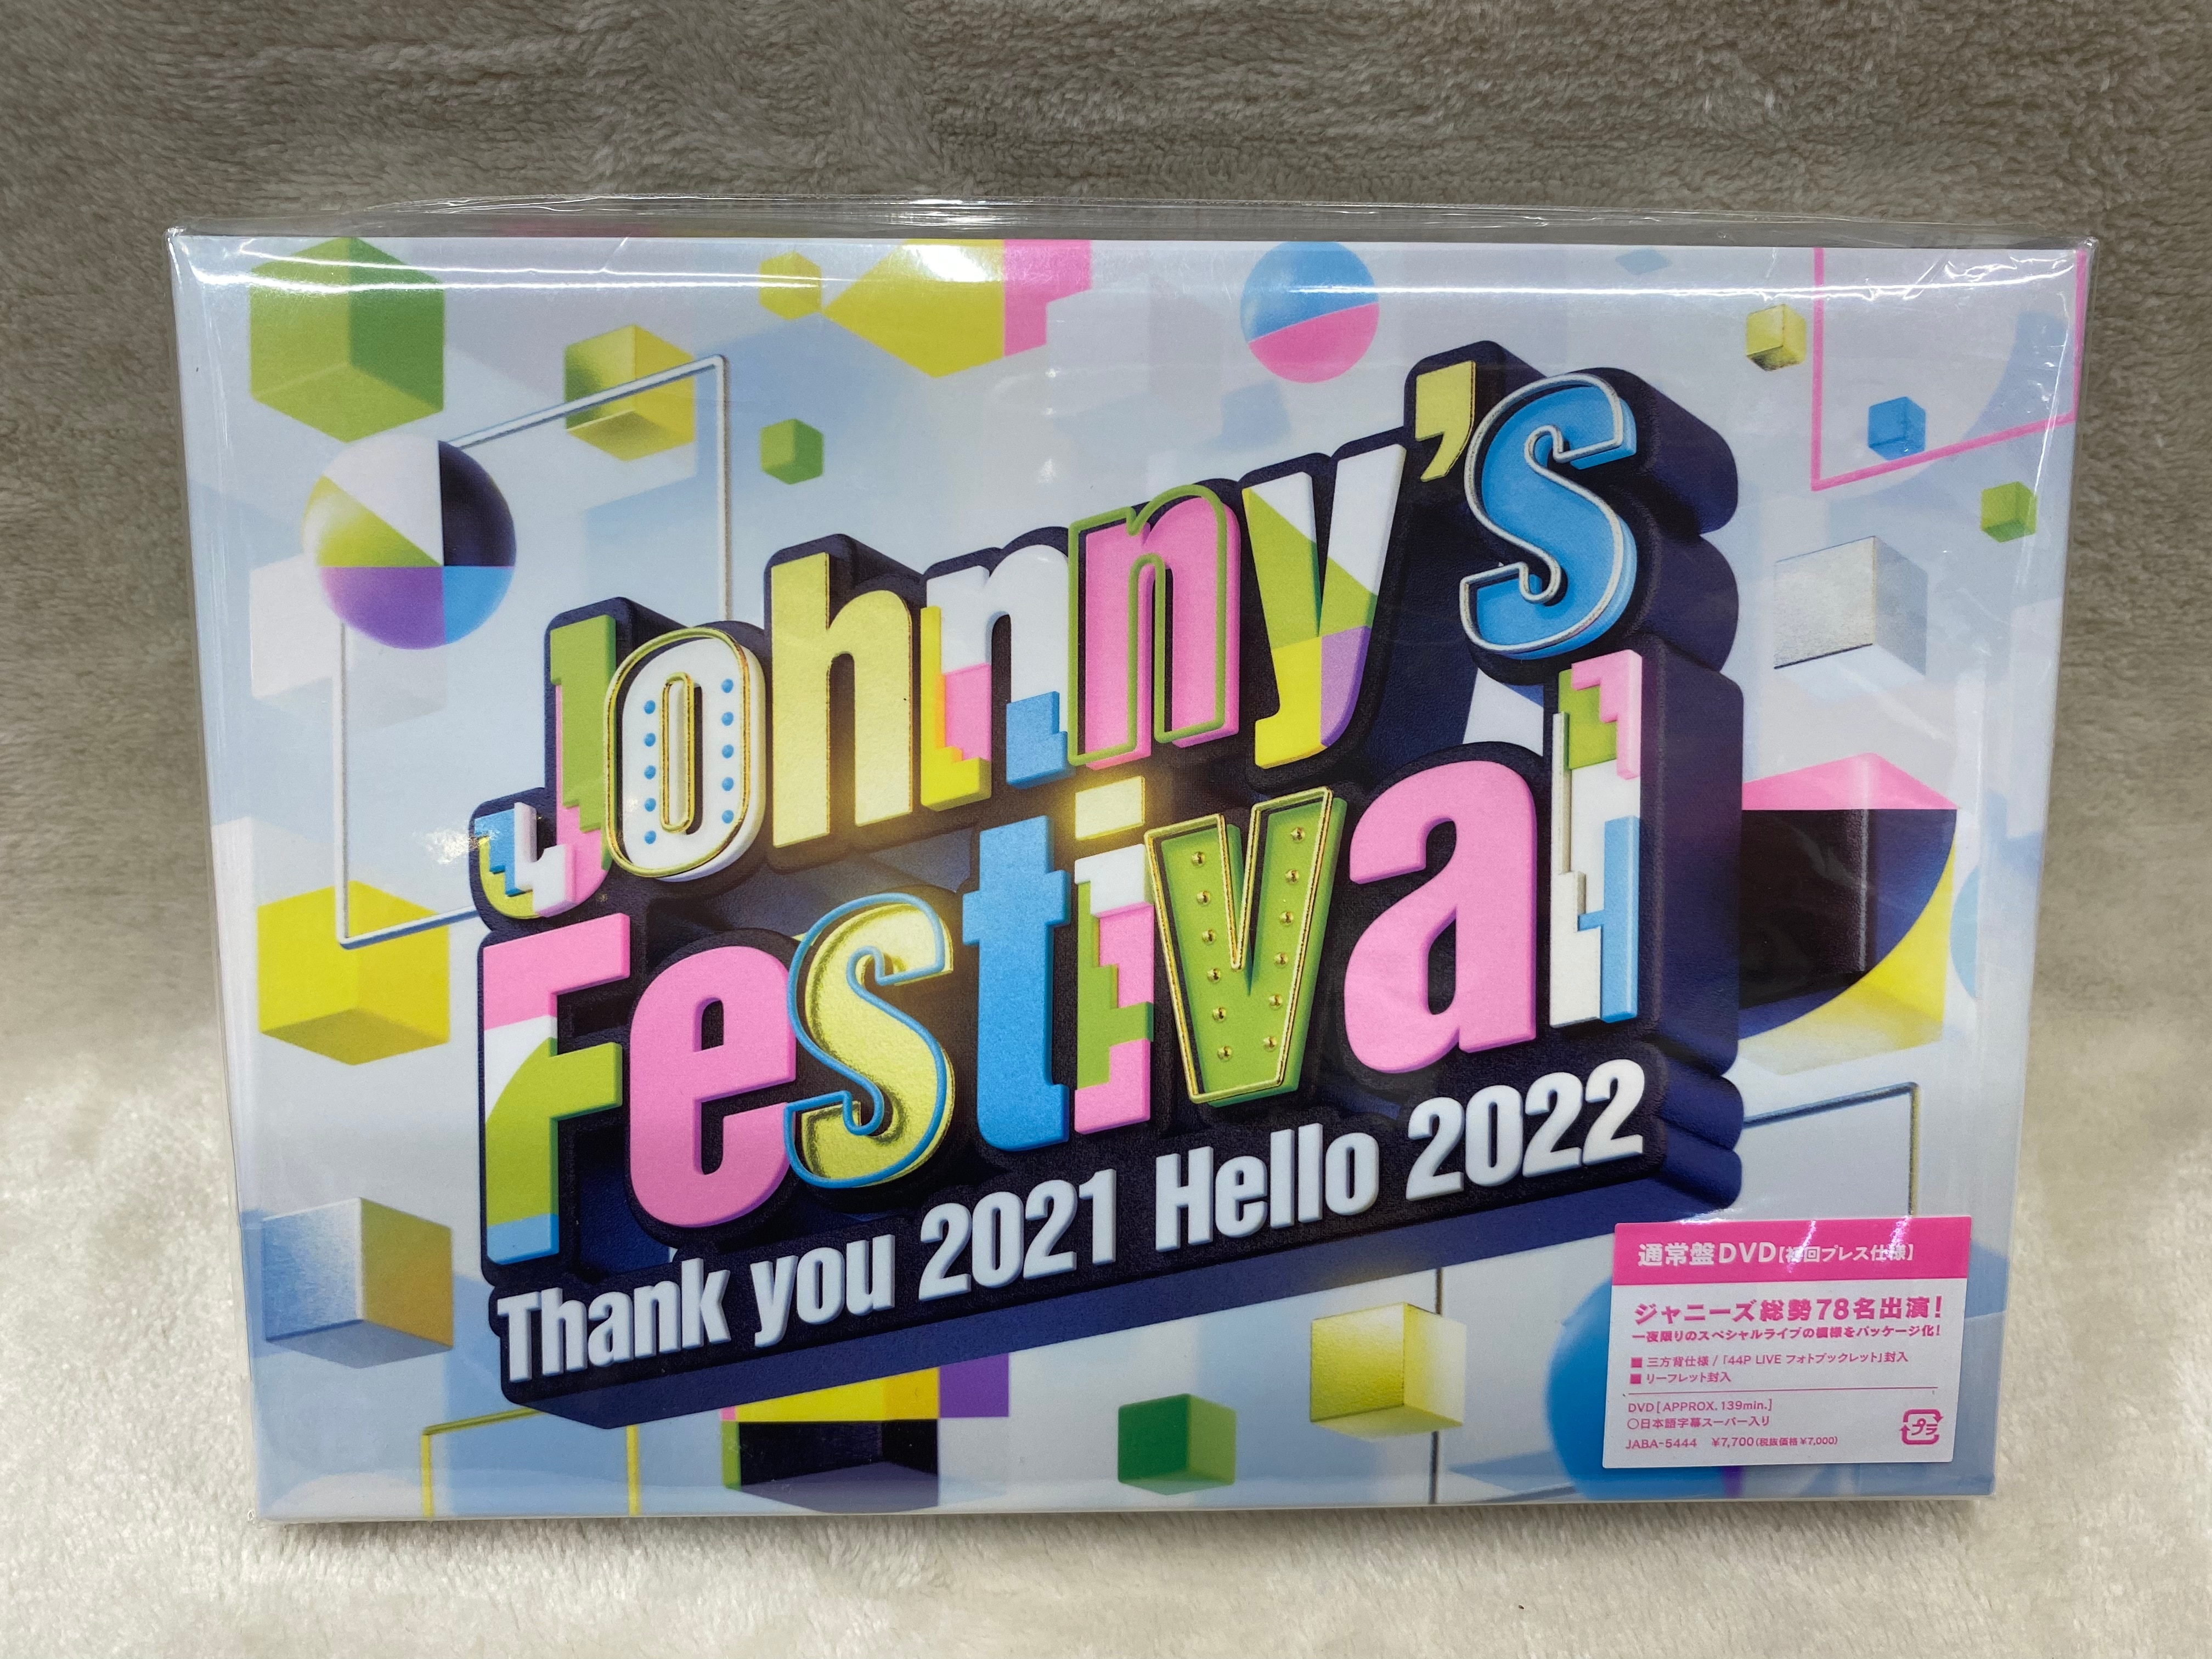 Johnny's DVD Regular First edition Press Johnny's Festival-thank you 2021  hello 2022-